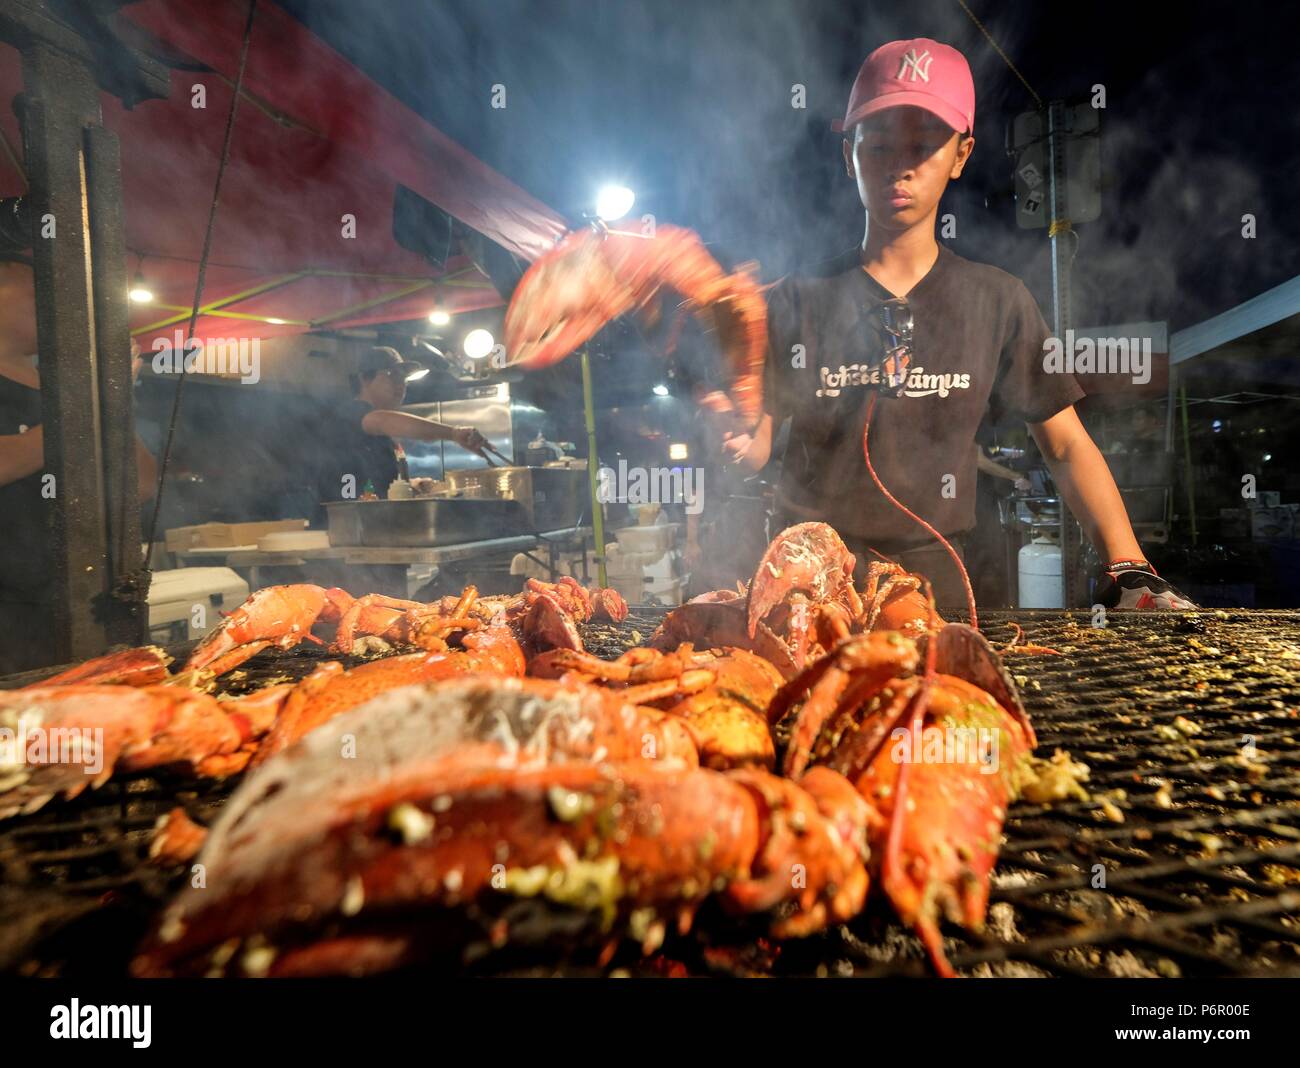 (180702) -- ARCADIA, July 2, 2018 (Xinhua) -- A vendor cooks lobsters at the '626 Night Market' in Arcadia, California, the United States on July 1, 2018. '626' is the area code of San Gabriel Valley in Los Angeles, a region with lots of Chinese. From dozens of booths to hundreds of vendors, in recent years, the '626 Night Market' has become the largest night market in the United States and a part of the urban culture in Los Angeles. (Xinhua/Zhao Hanrong) (zxj) Stock Photo